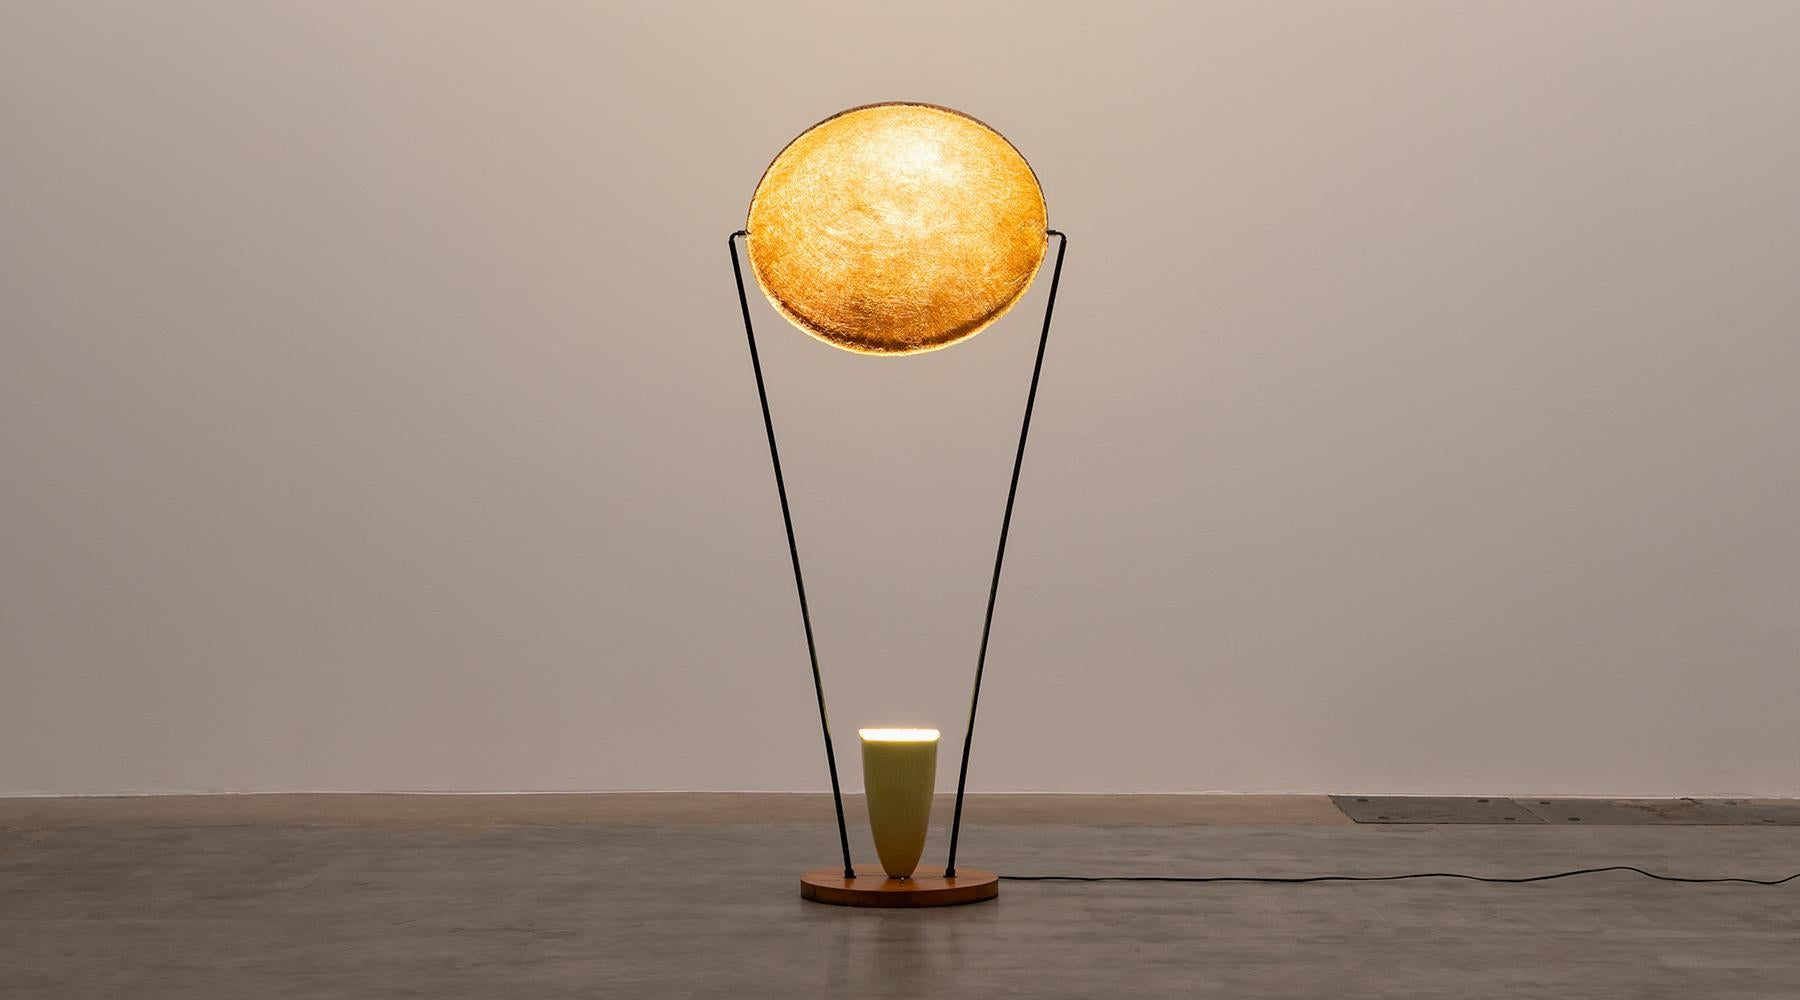 Floor lamp, ceramic shade in yellow and fiberglass diffuser by Mitchel Bobrick, USA, 1950.

A marvelous example of 1950s modernism by US-designer Mitchell Bobrick. The lamps exceptional elements produce a sculptural character, making it typical